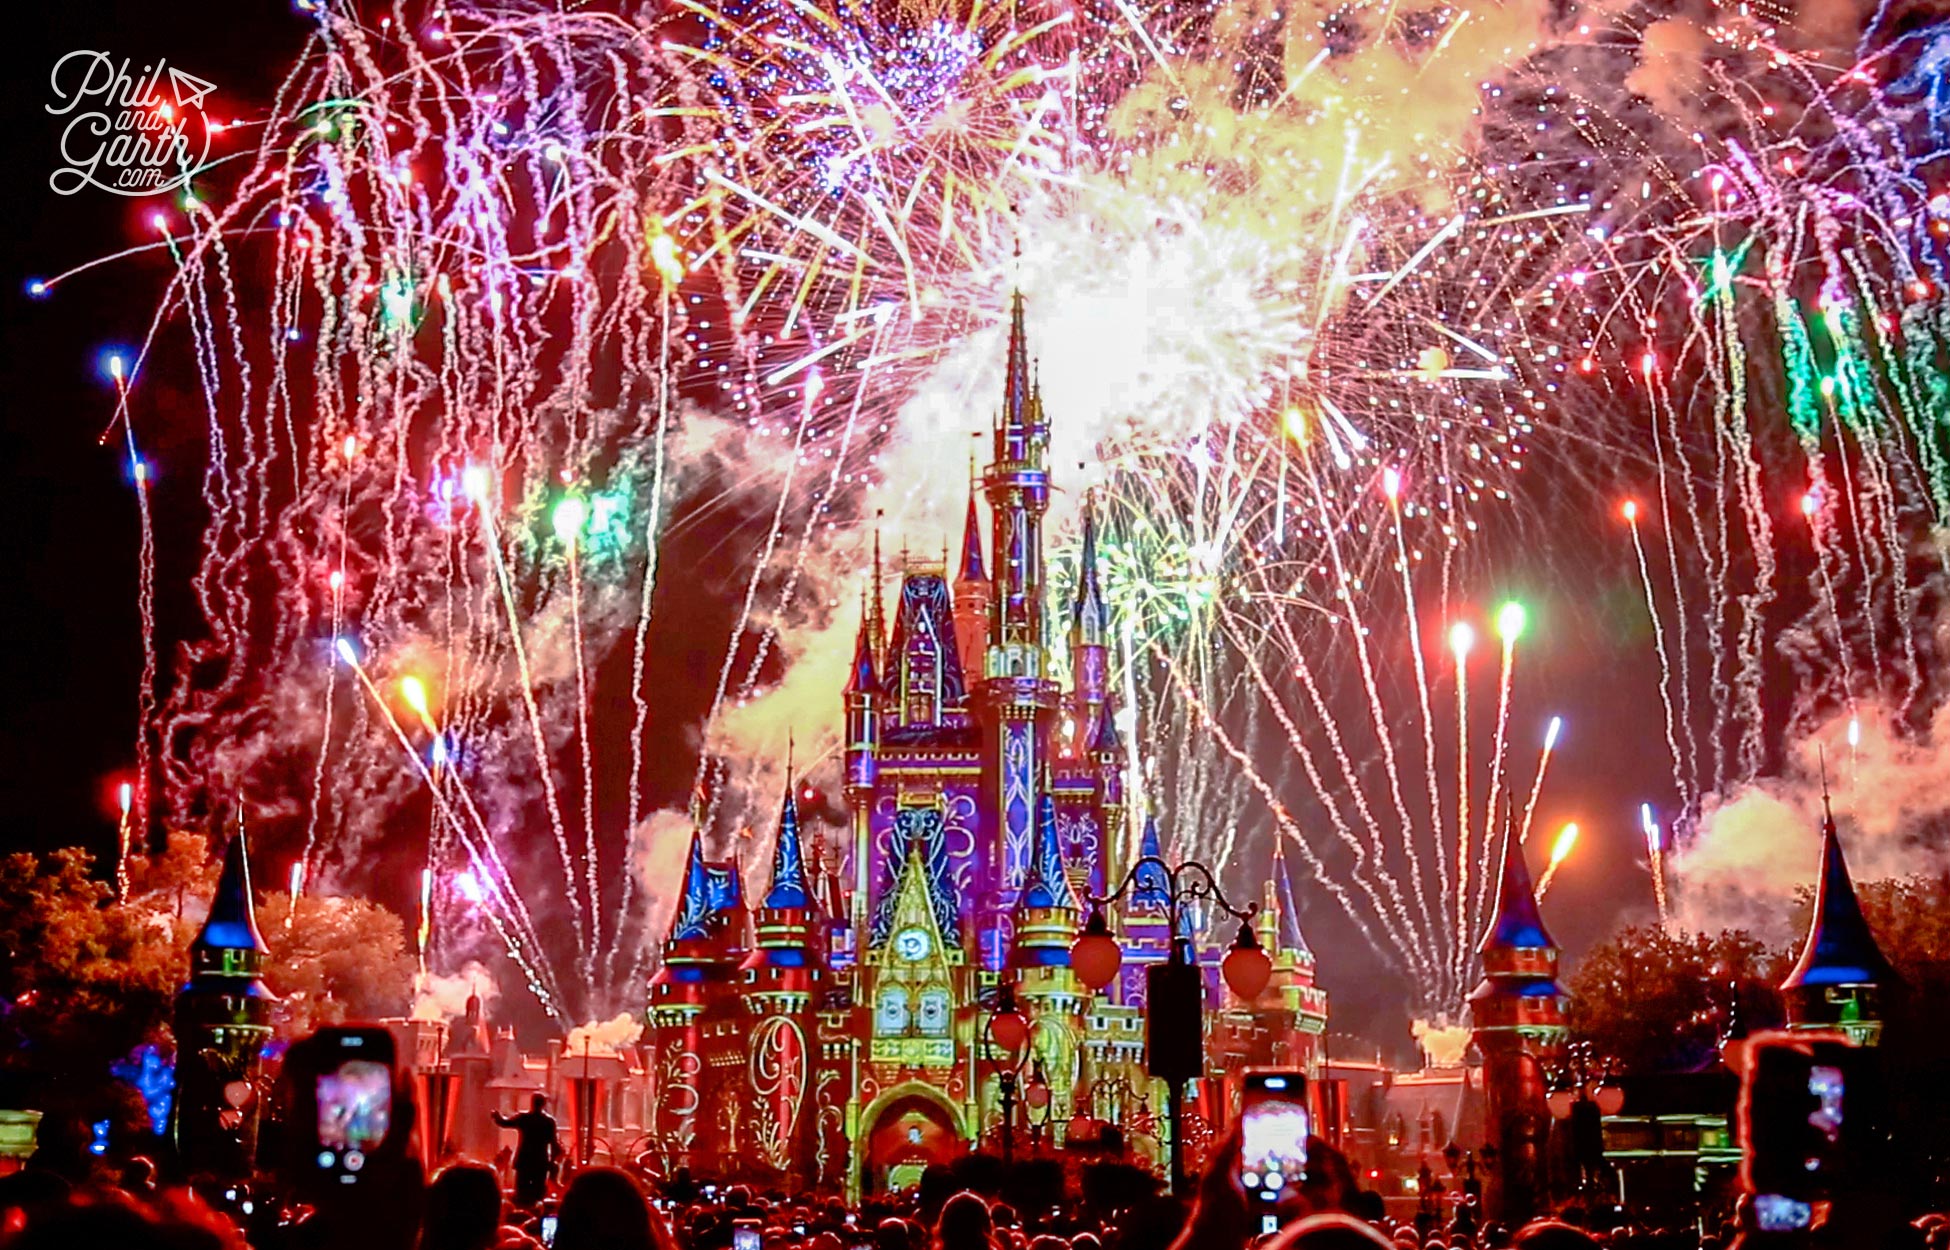 The incredible fireworks climax at Disney's Magic Kingdom